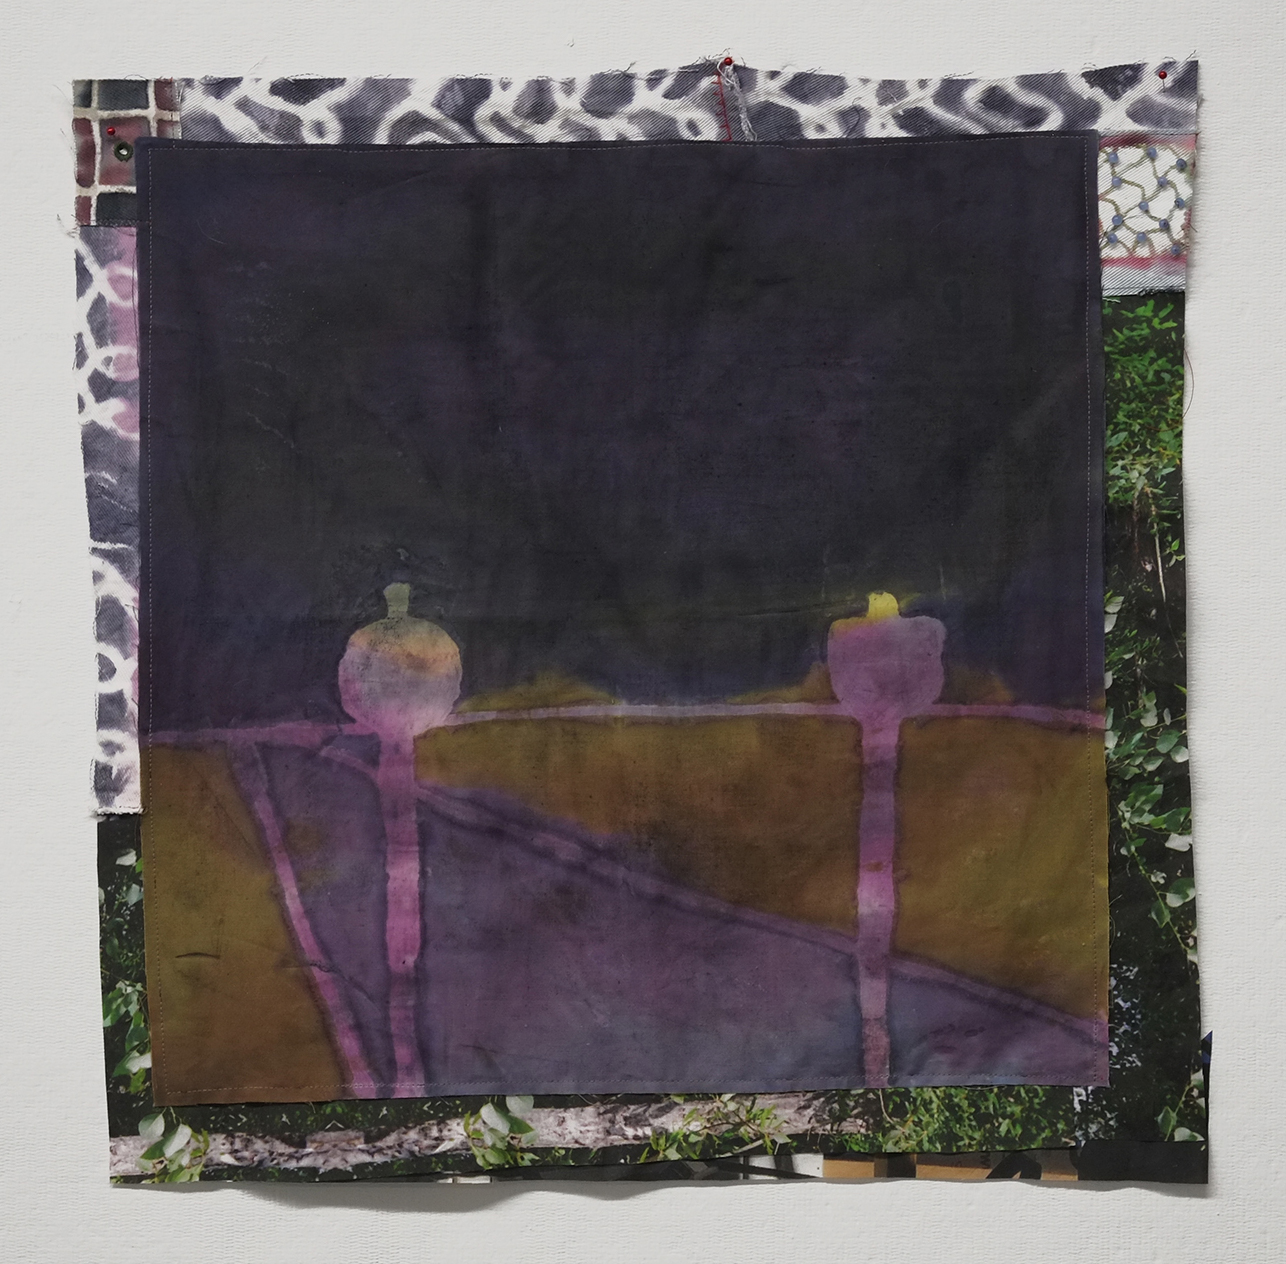  Two Signs at Dusk  dye, assorted fabrics, thread, beads  20x20"  2016 